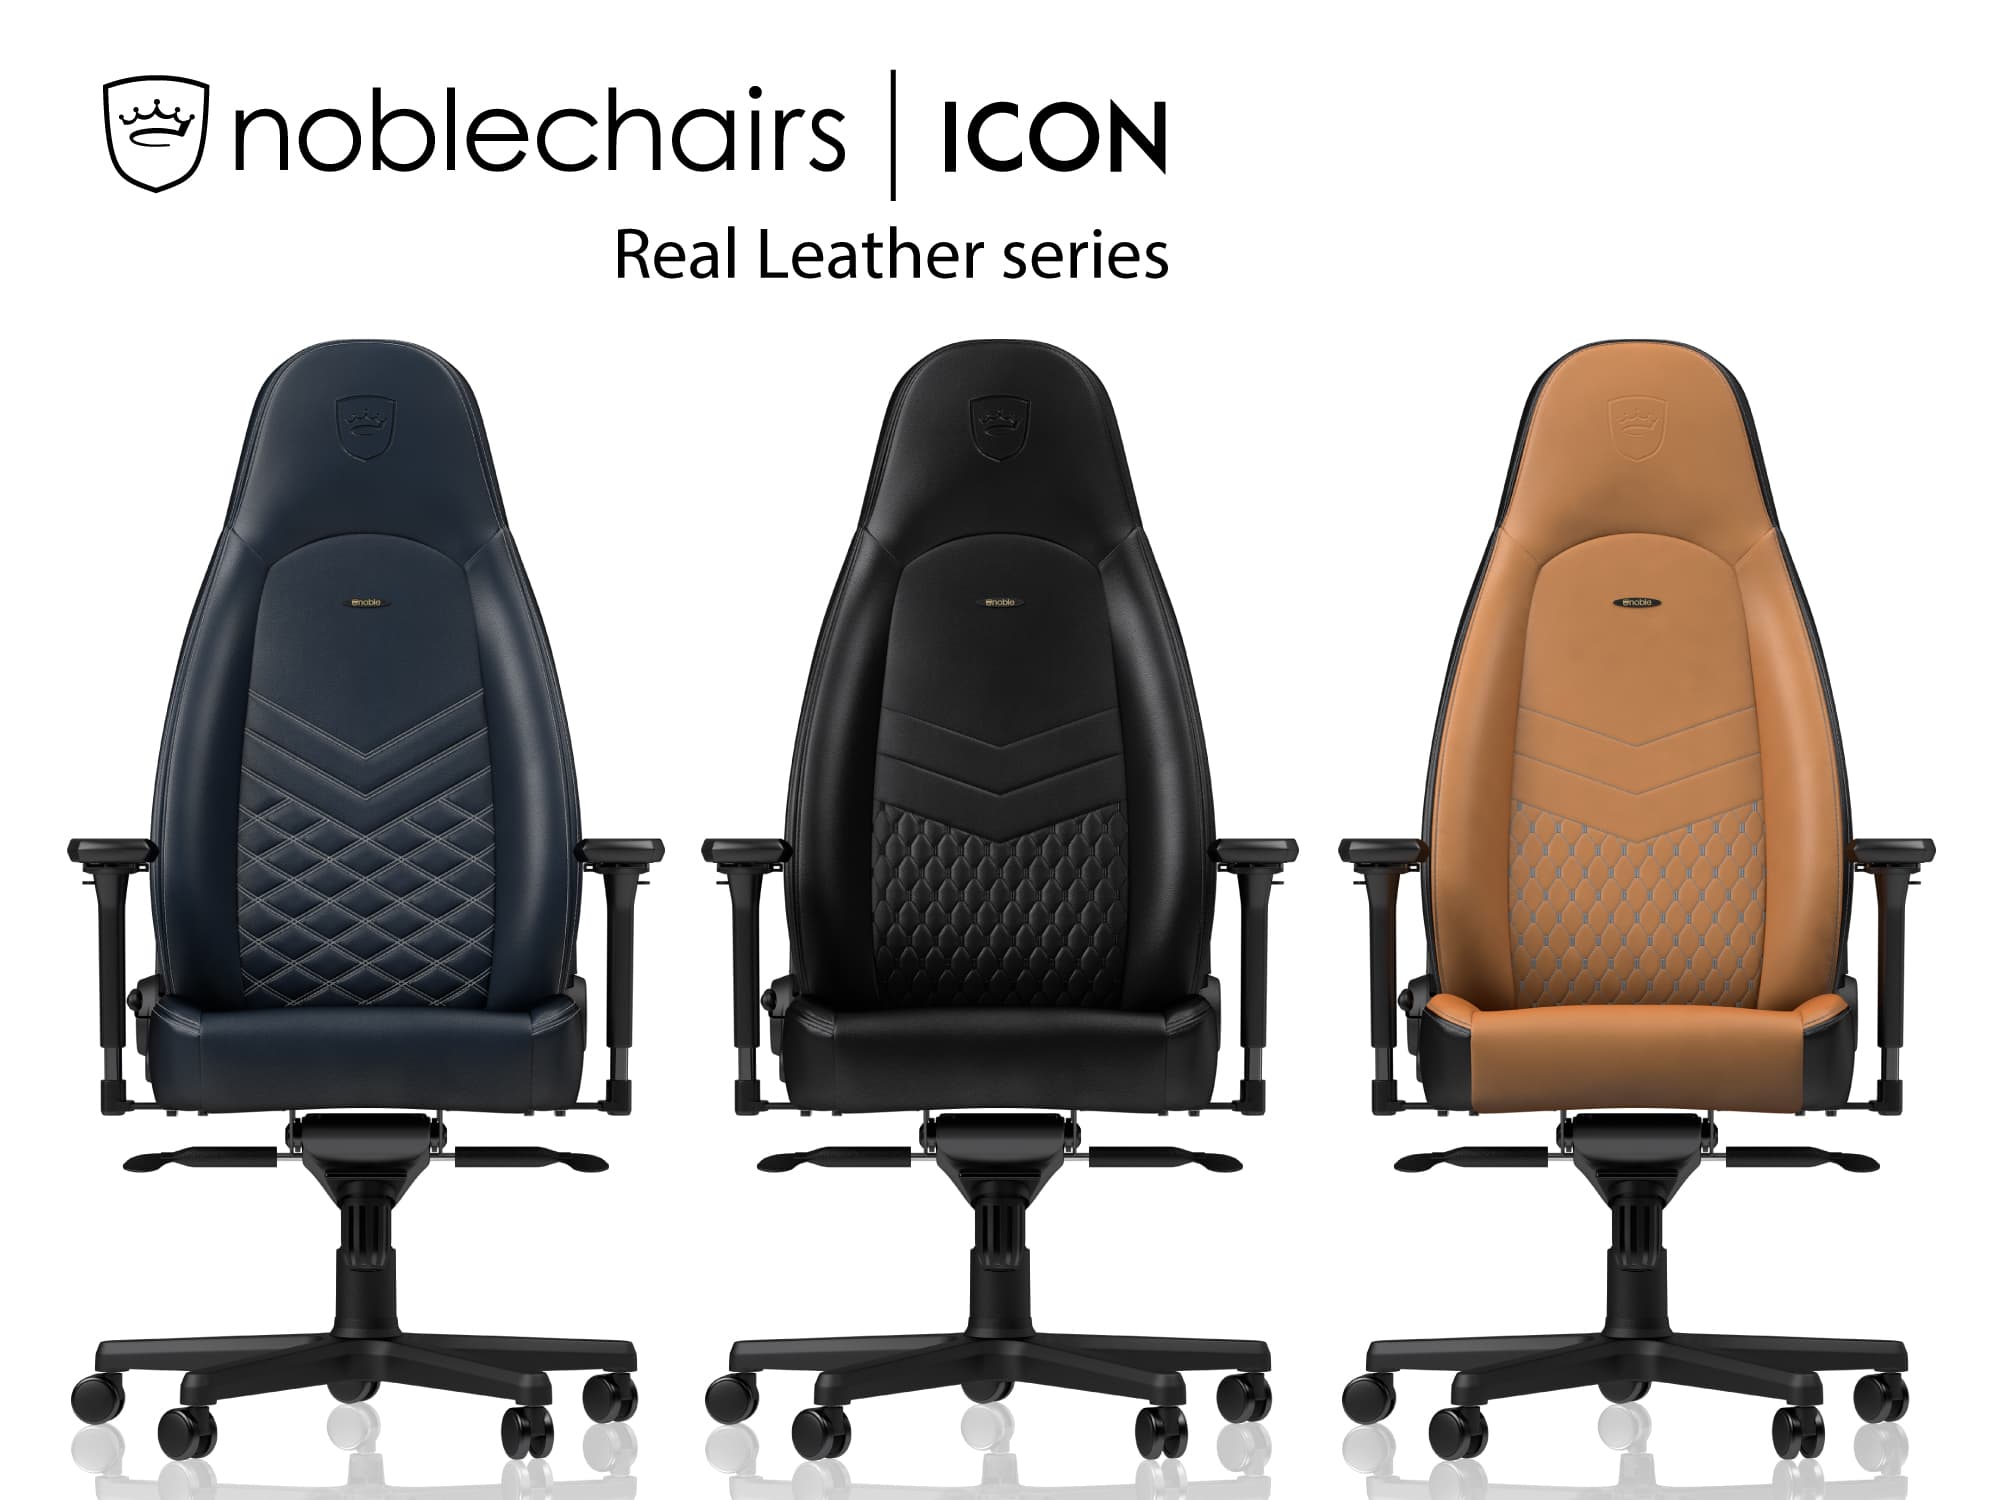 noblechairs ICON - Real Leather - ゲーミングチェア - 株式会社 